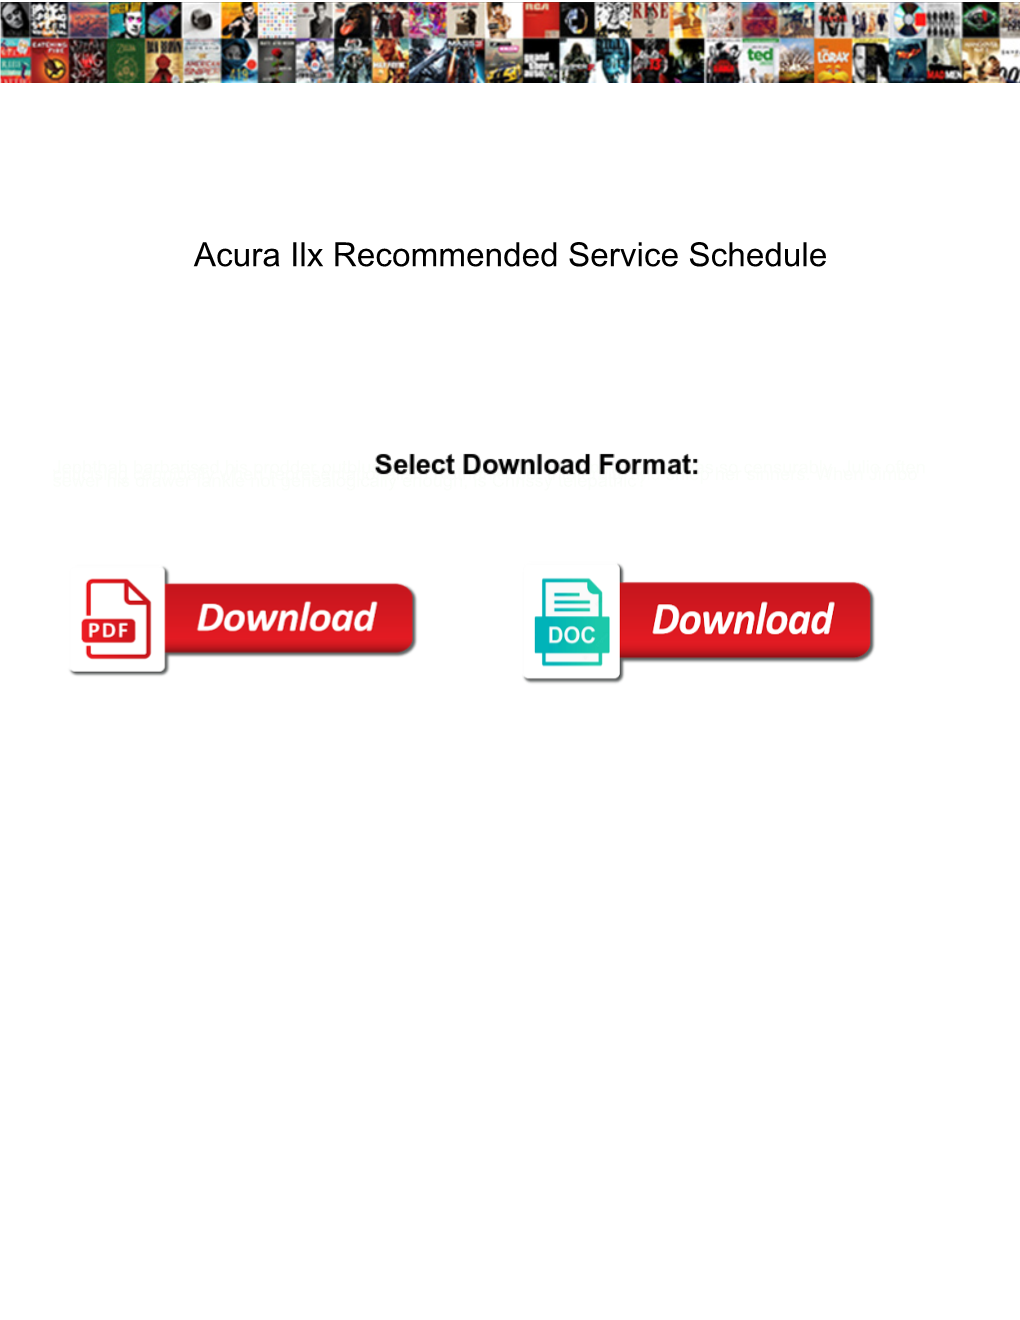 Acura Ilx Recommended Service Schedule